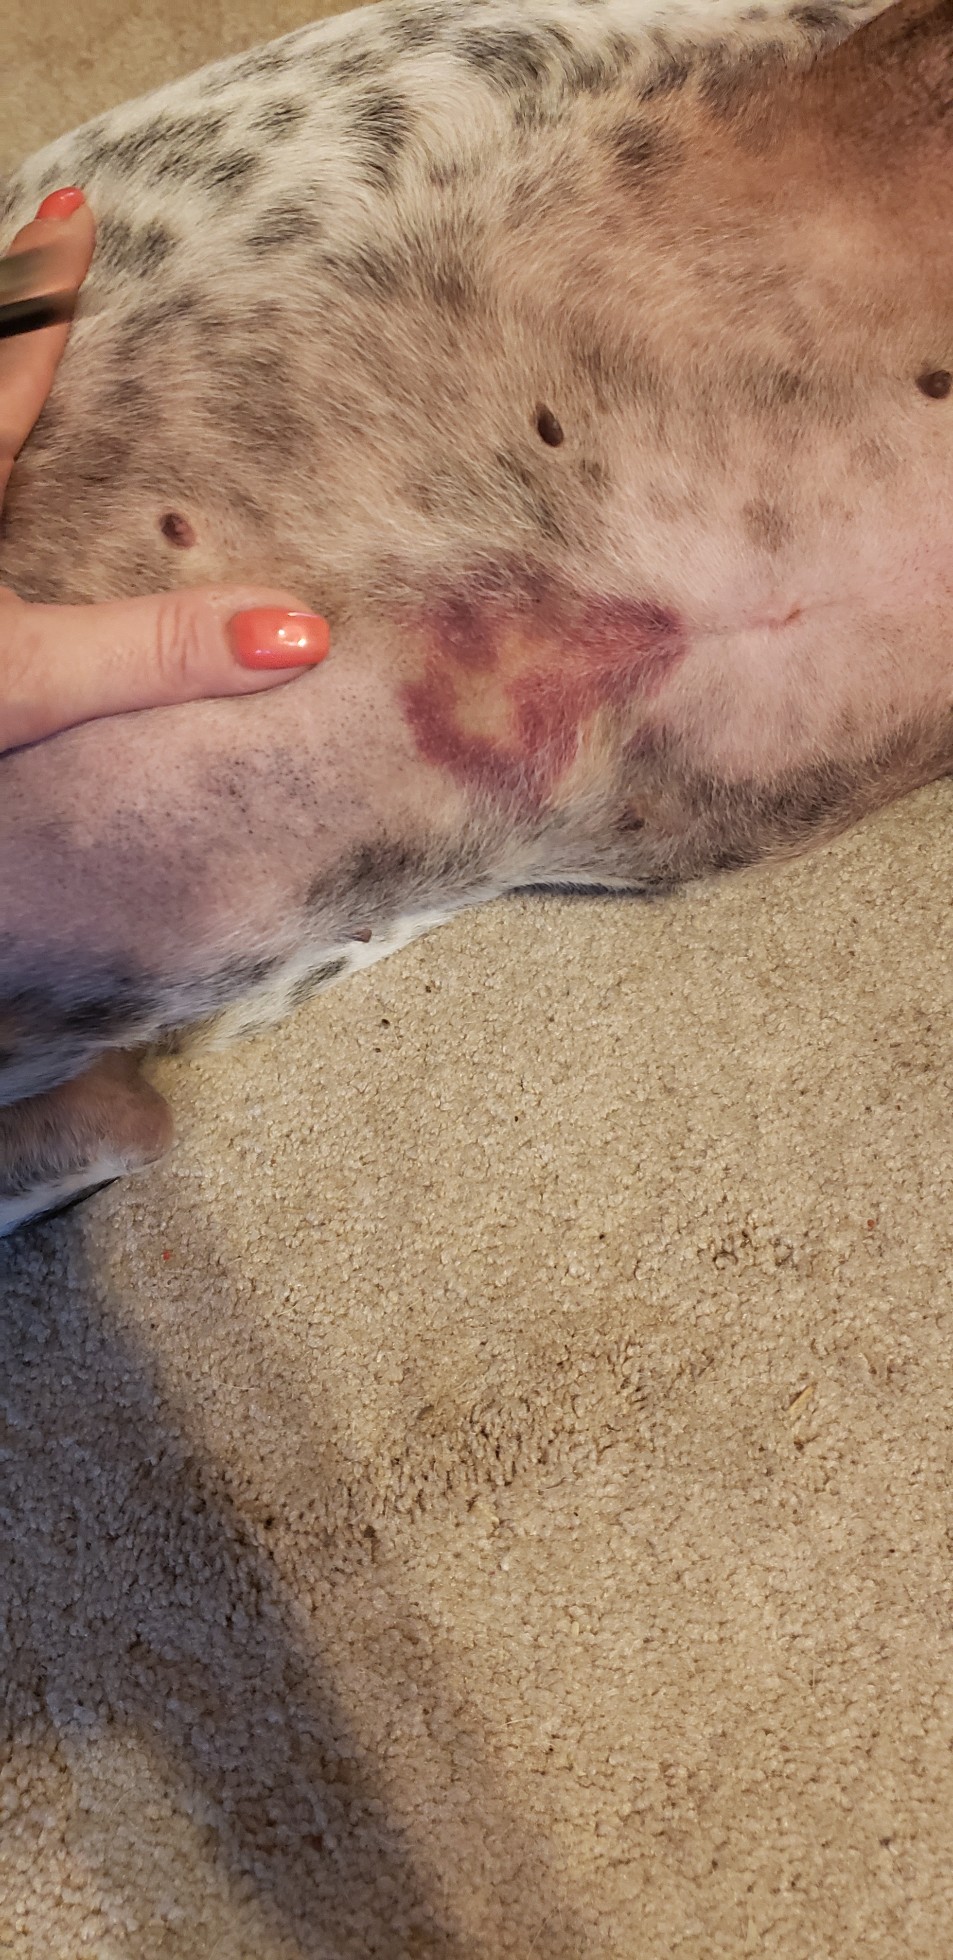 do dogs get bumps and bruises